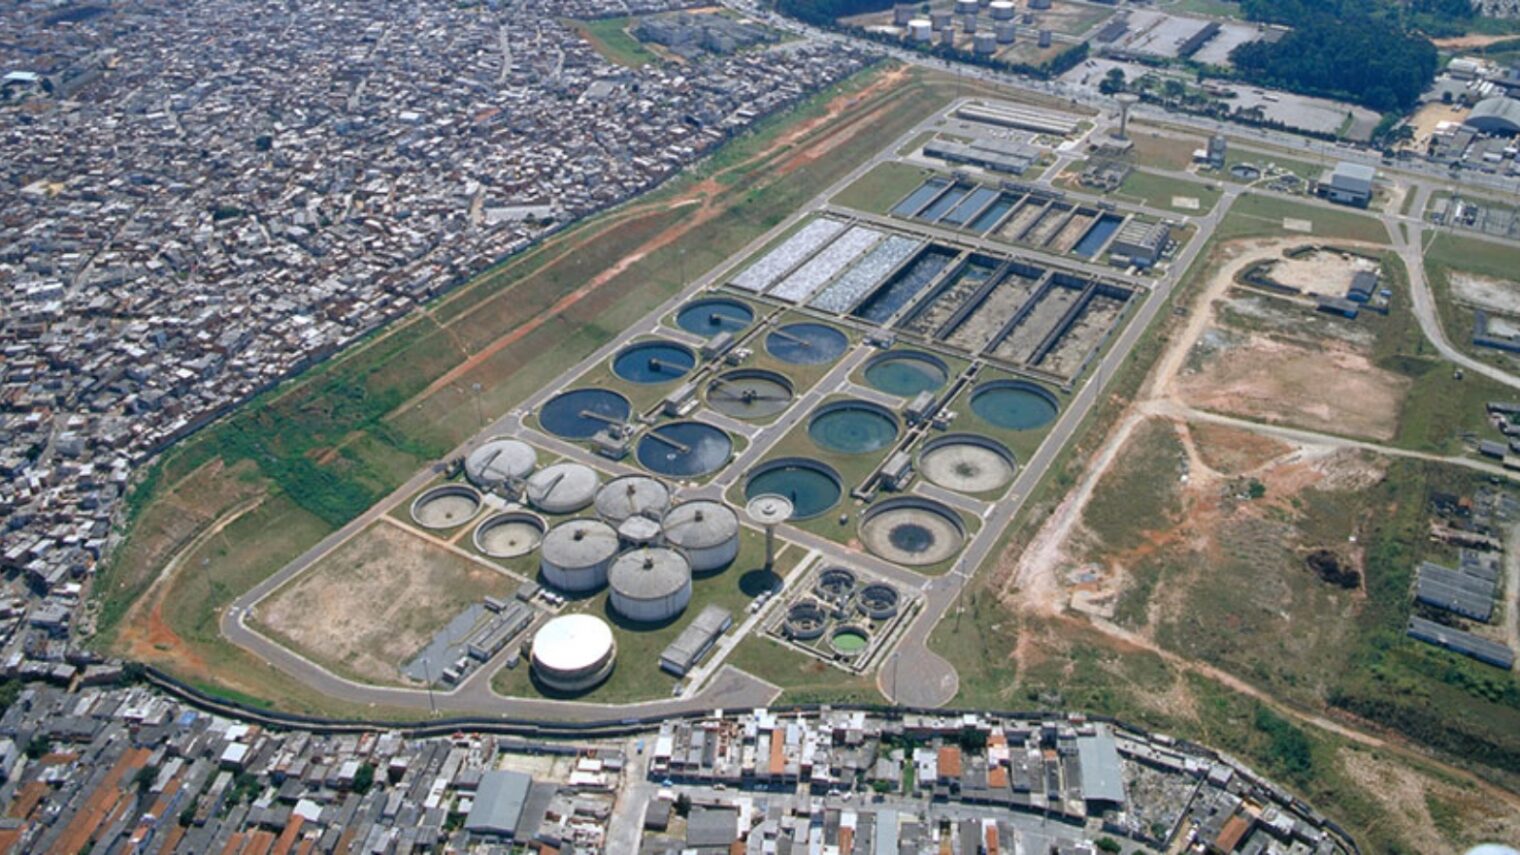 Lodologic will bring Israeli technology facility to this this Brazilian plant treating over 310 tons of sludge from 4 million residents, every day. Photo courtesy of Lodologic